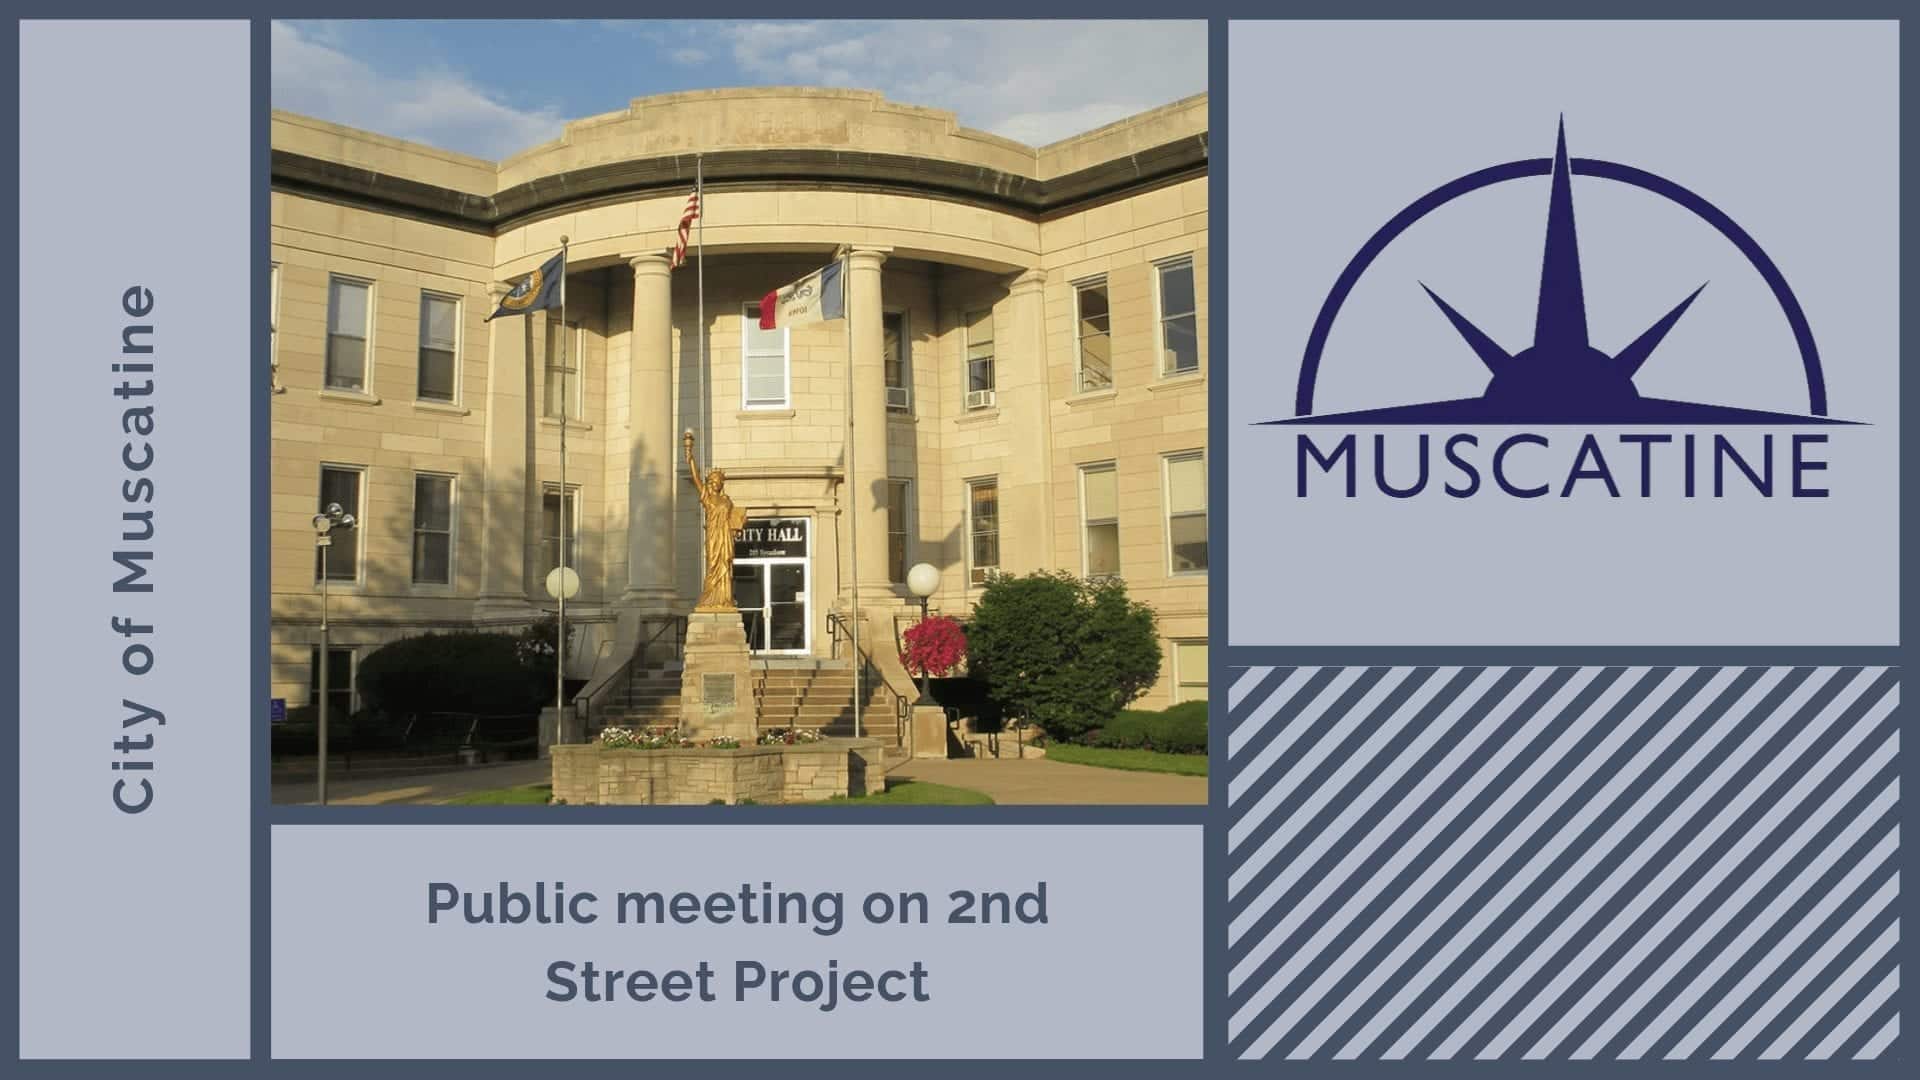 Public meeting on 2nd Street Project